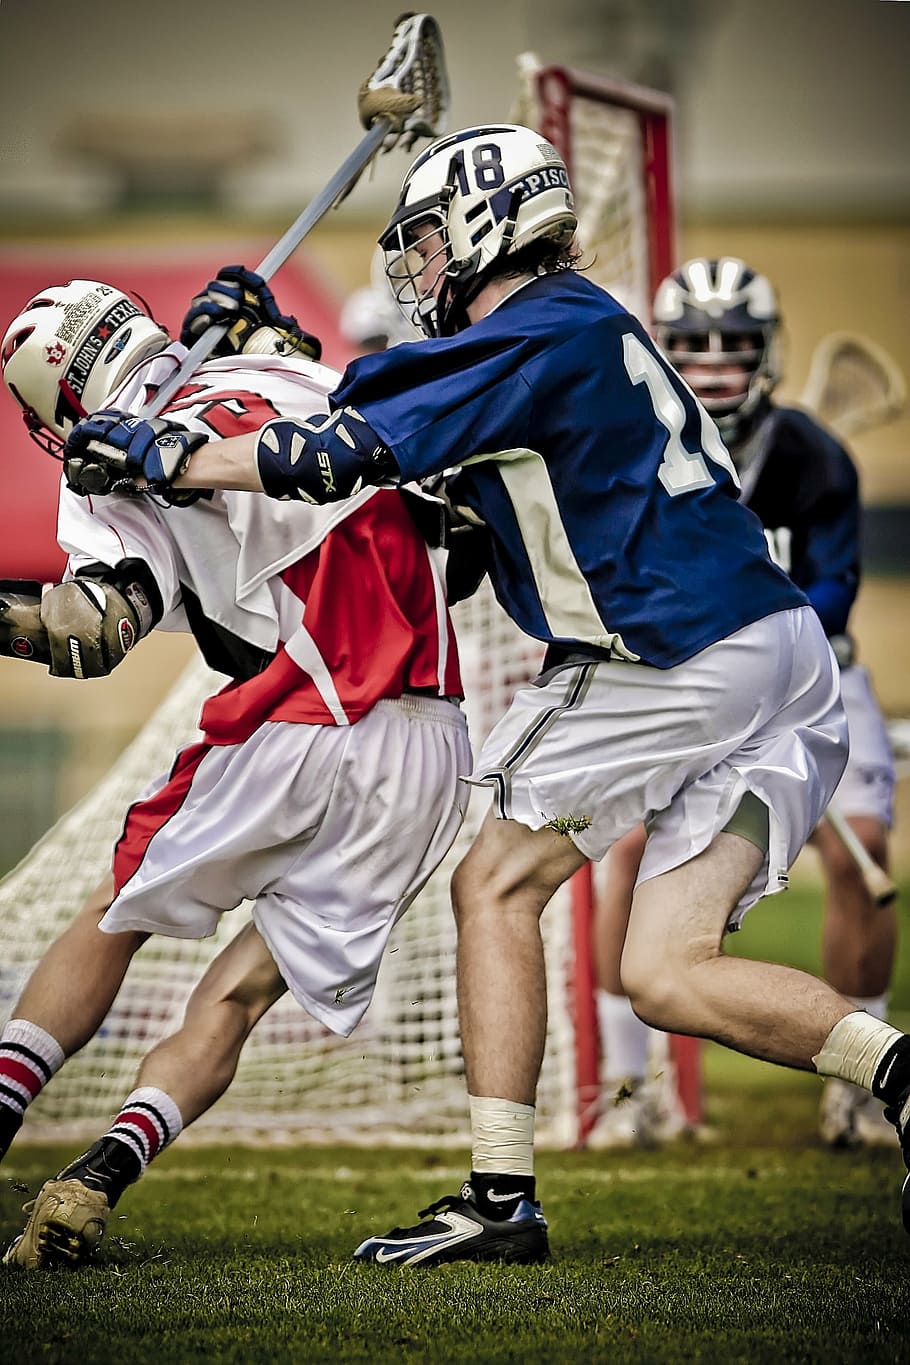 men, playing, lacrosse, field, hitting, player, clash, athletic, compete, competition